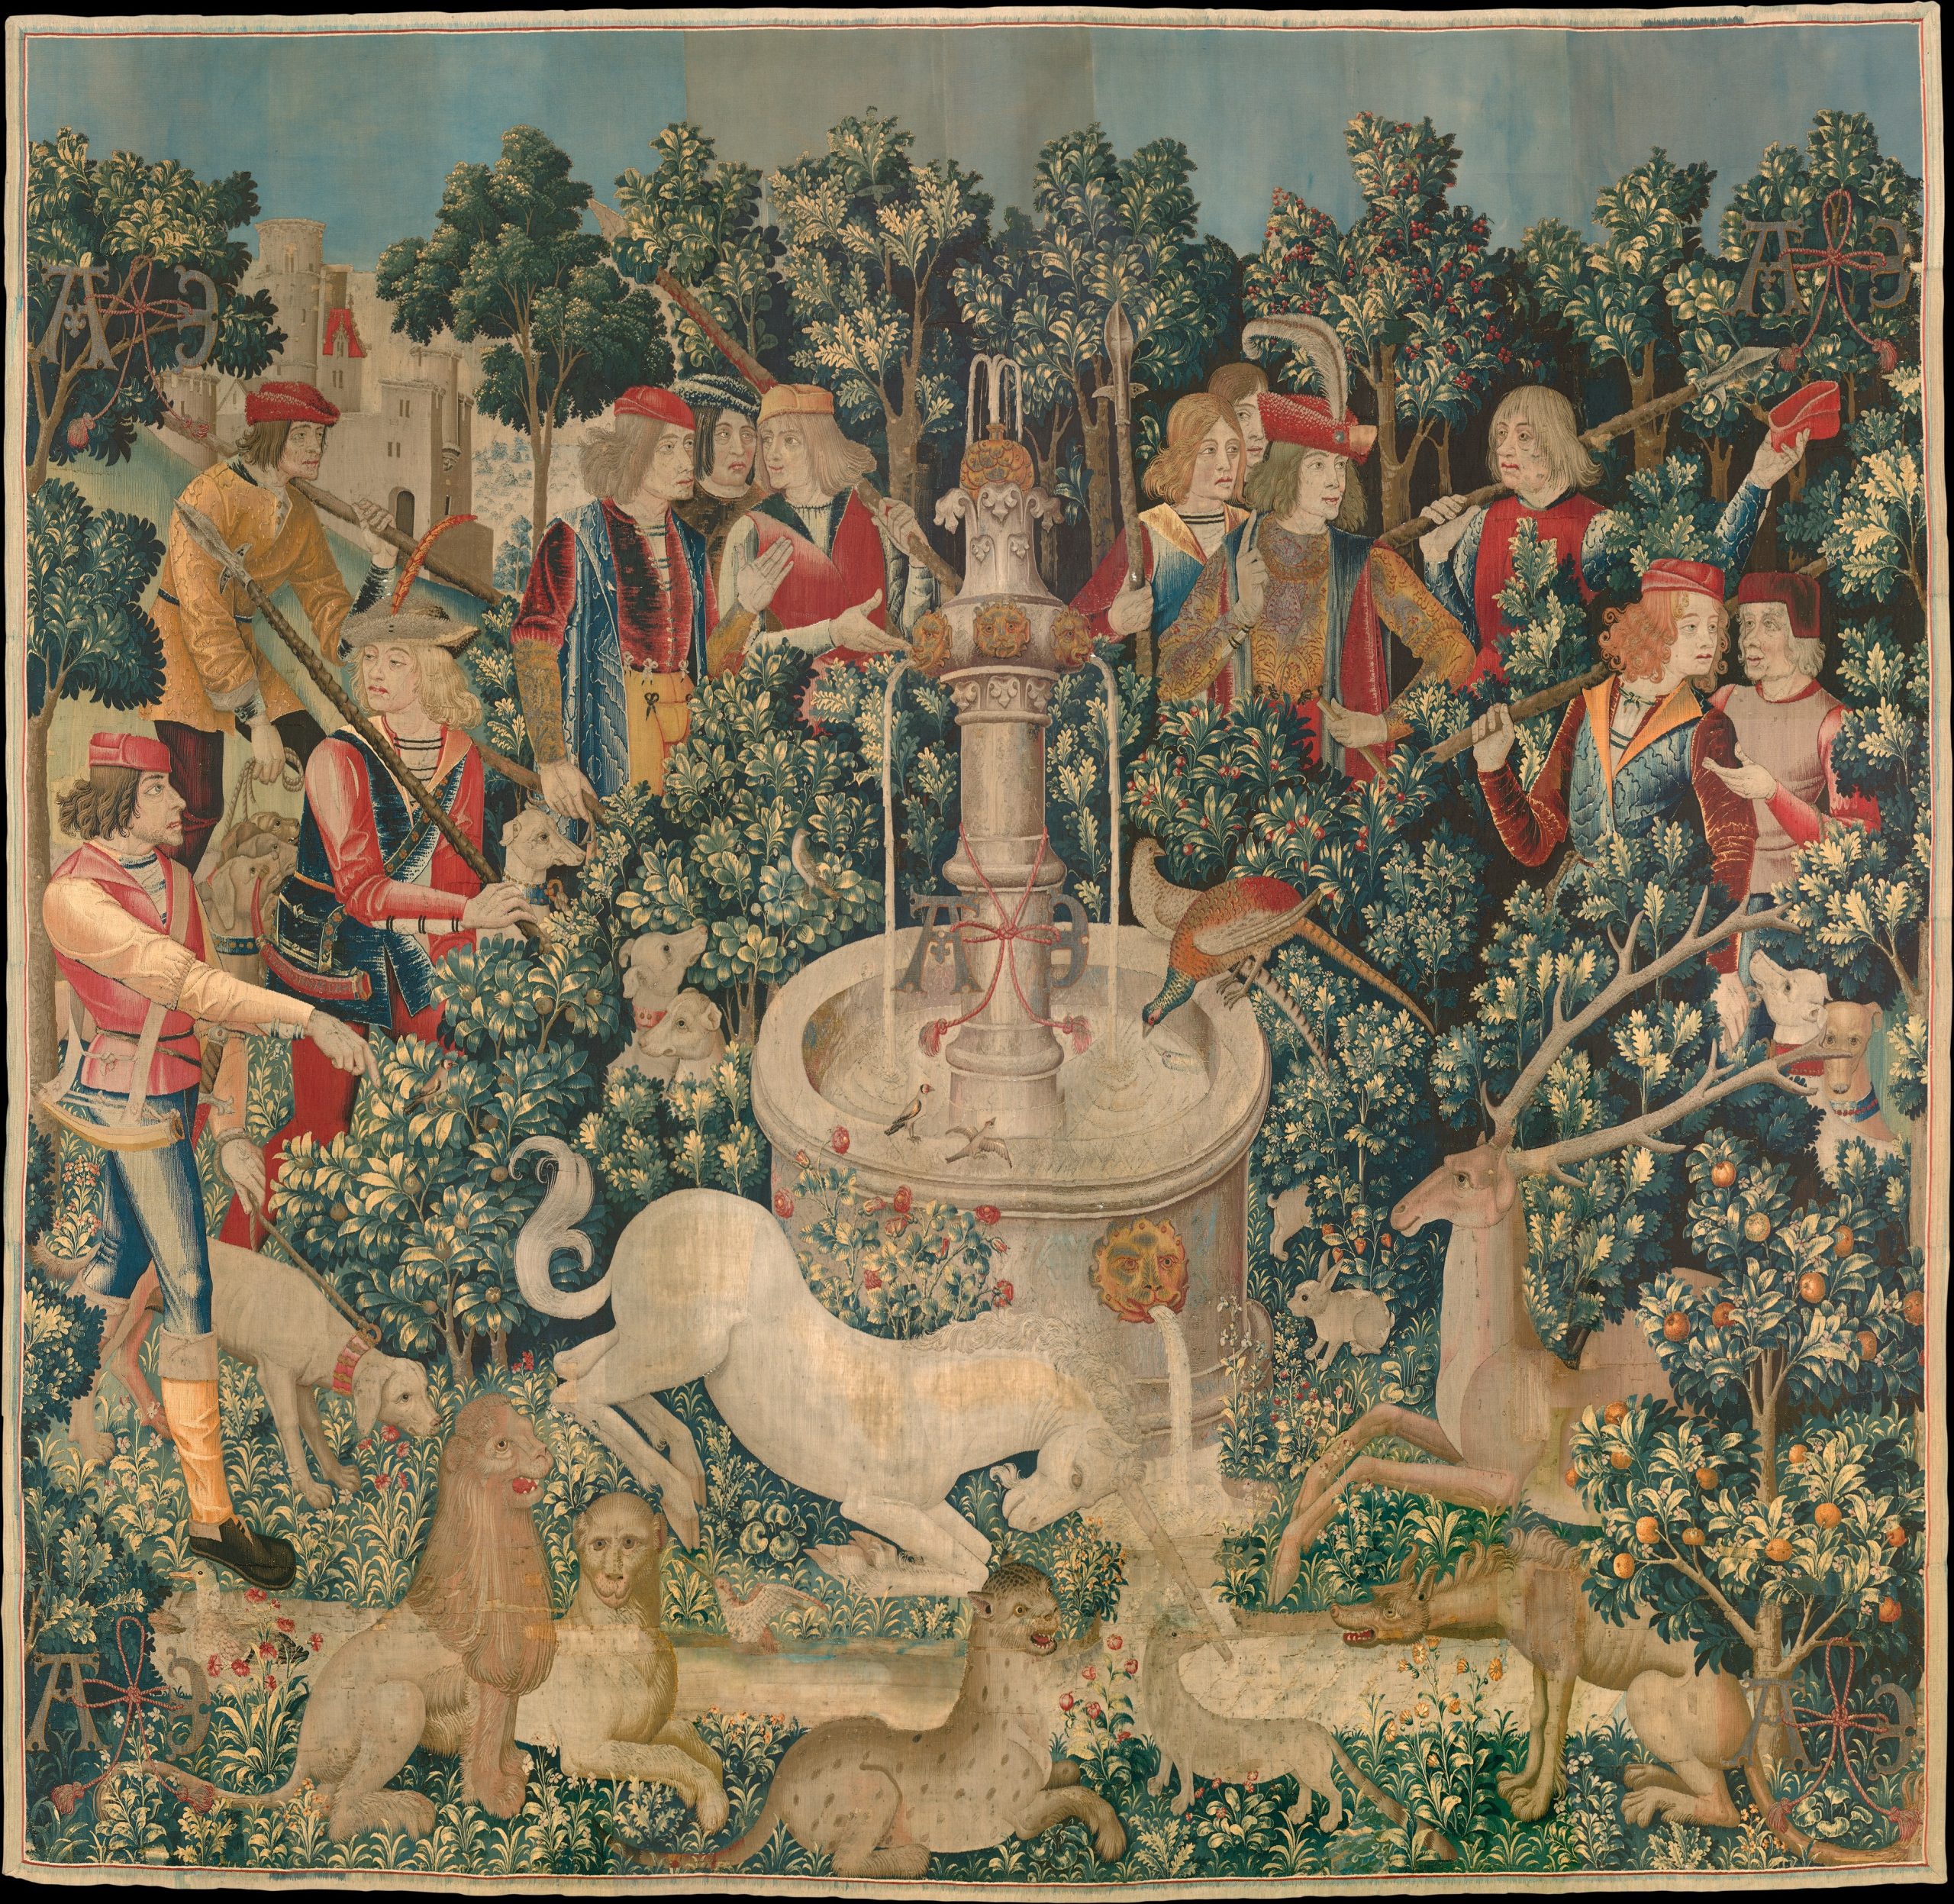 A group of armed men surround a fountain which flourishes with plants and unicorns surrounding it.